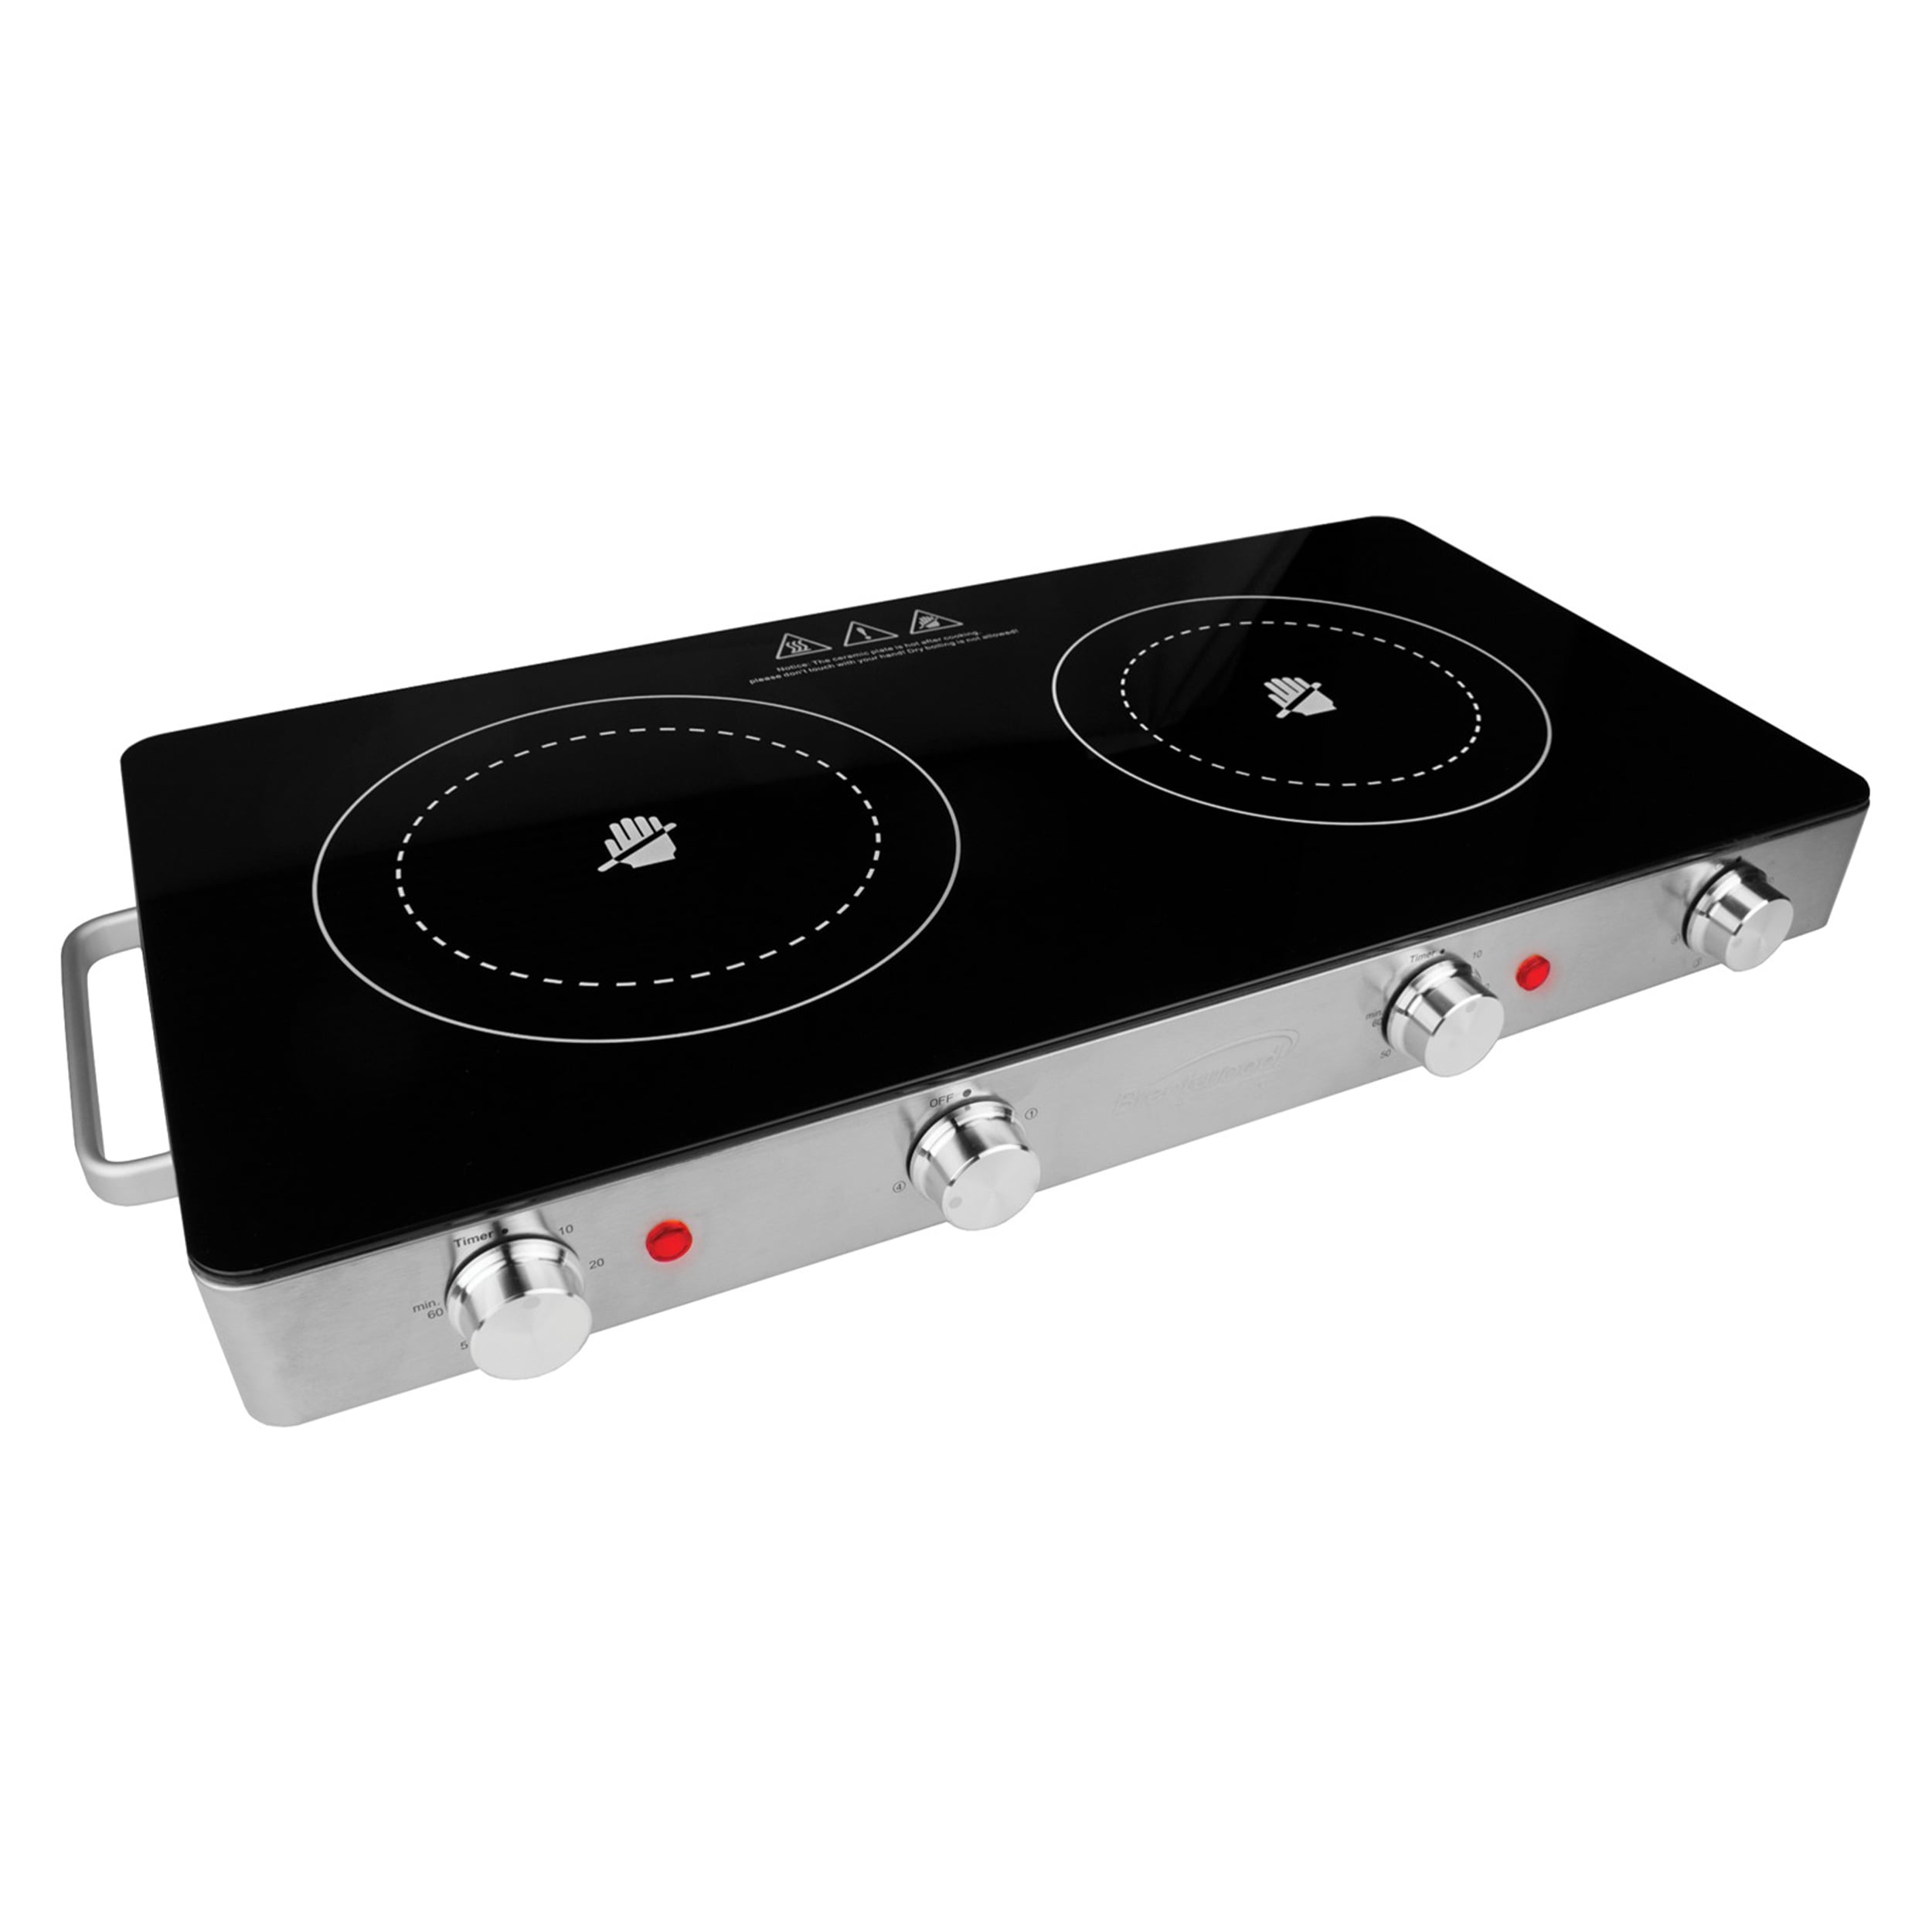 Double Infrared Burner 7.1 in. Stainless Steel Sliver Countertop Hot P